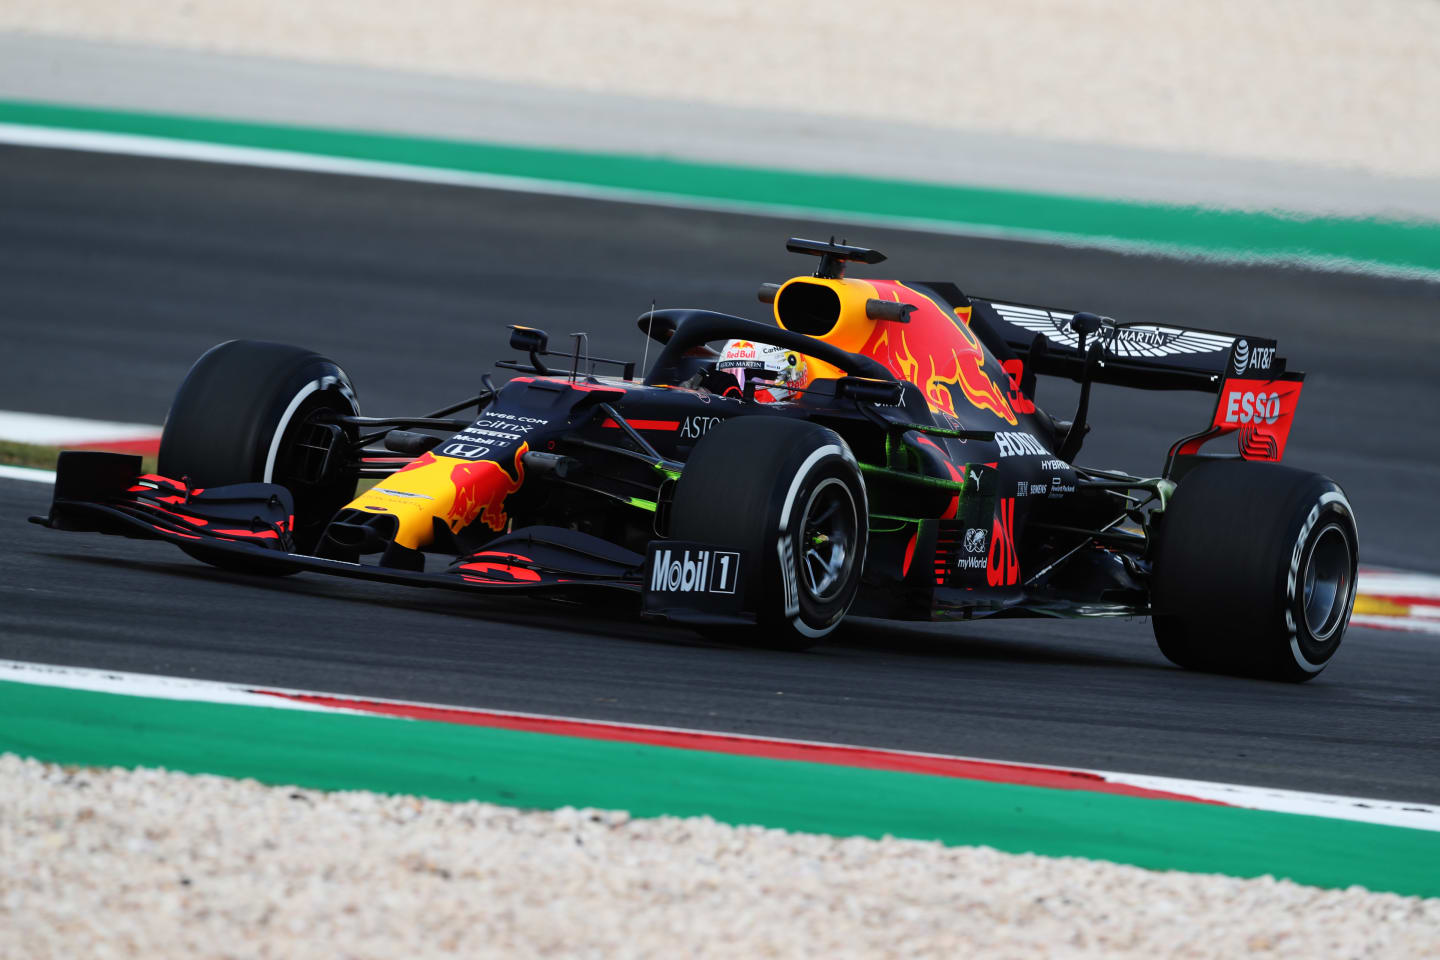 PORTIMAO, PORTUGAL - OCTOBER 23: Max Verstappen of the Netherlands driving the (33) Aston Martin